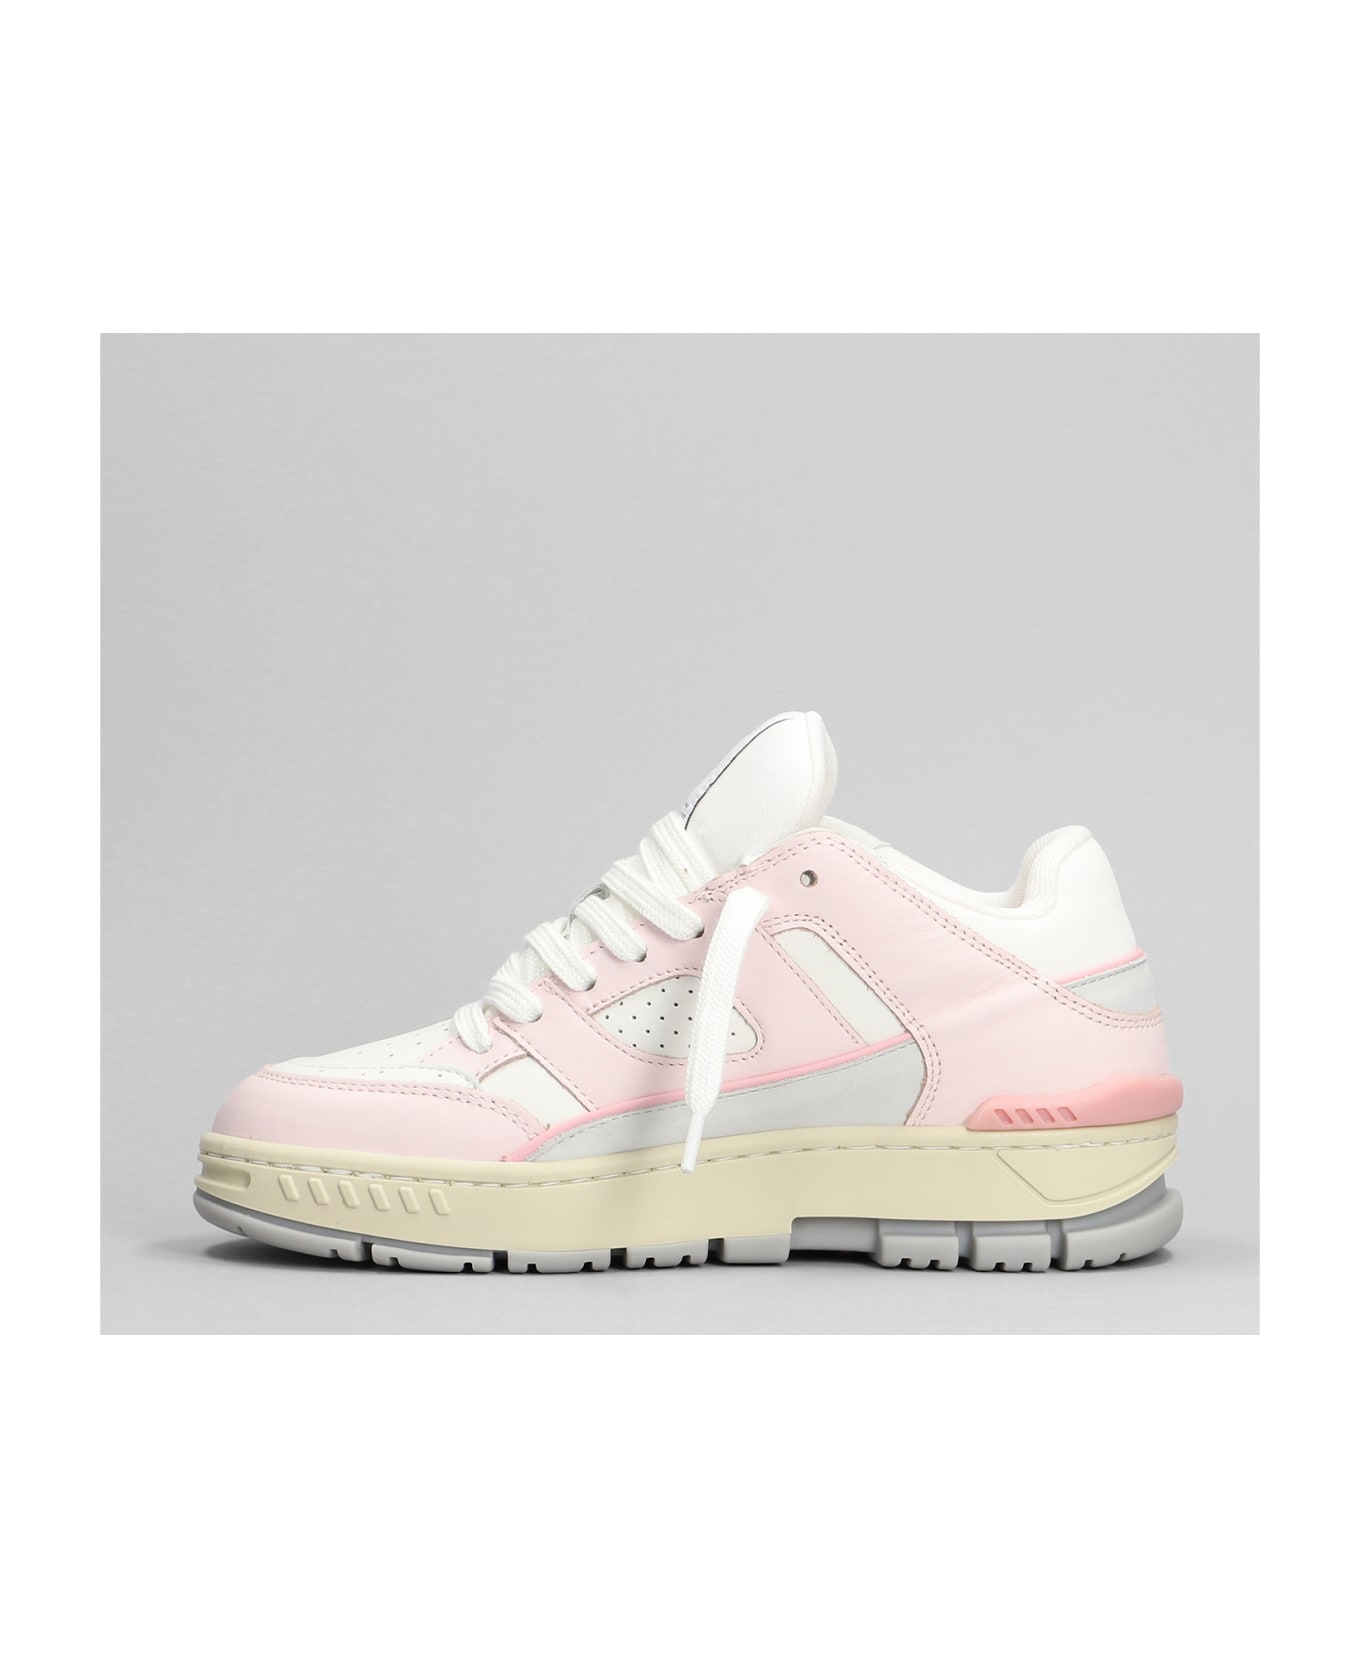 Axel Arigato Area Lo Sneaker Sneakers In Rose-pink Leather - rose-pink